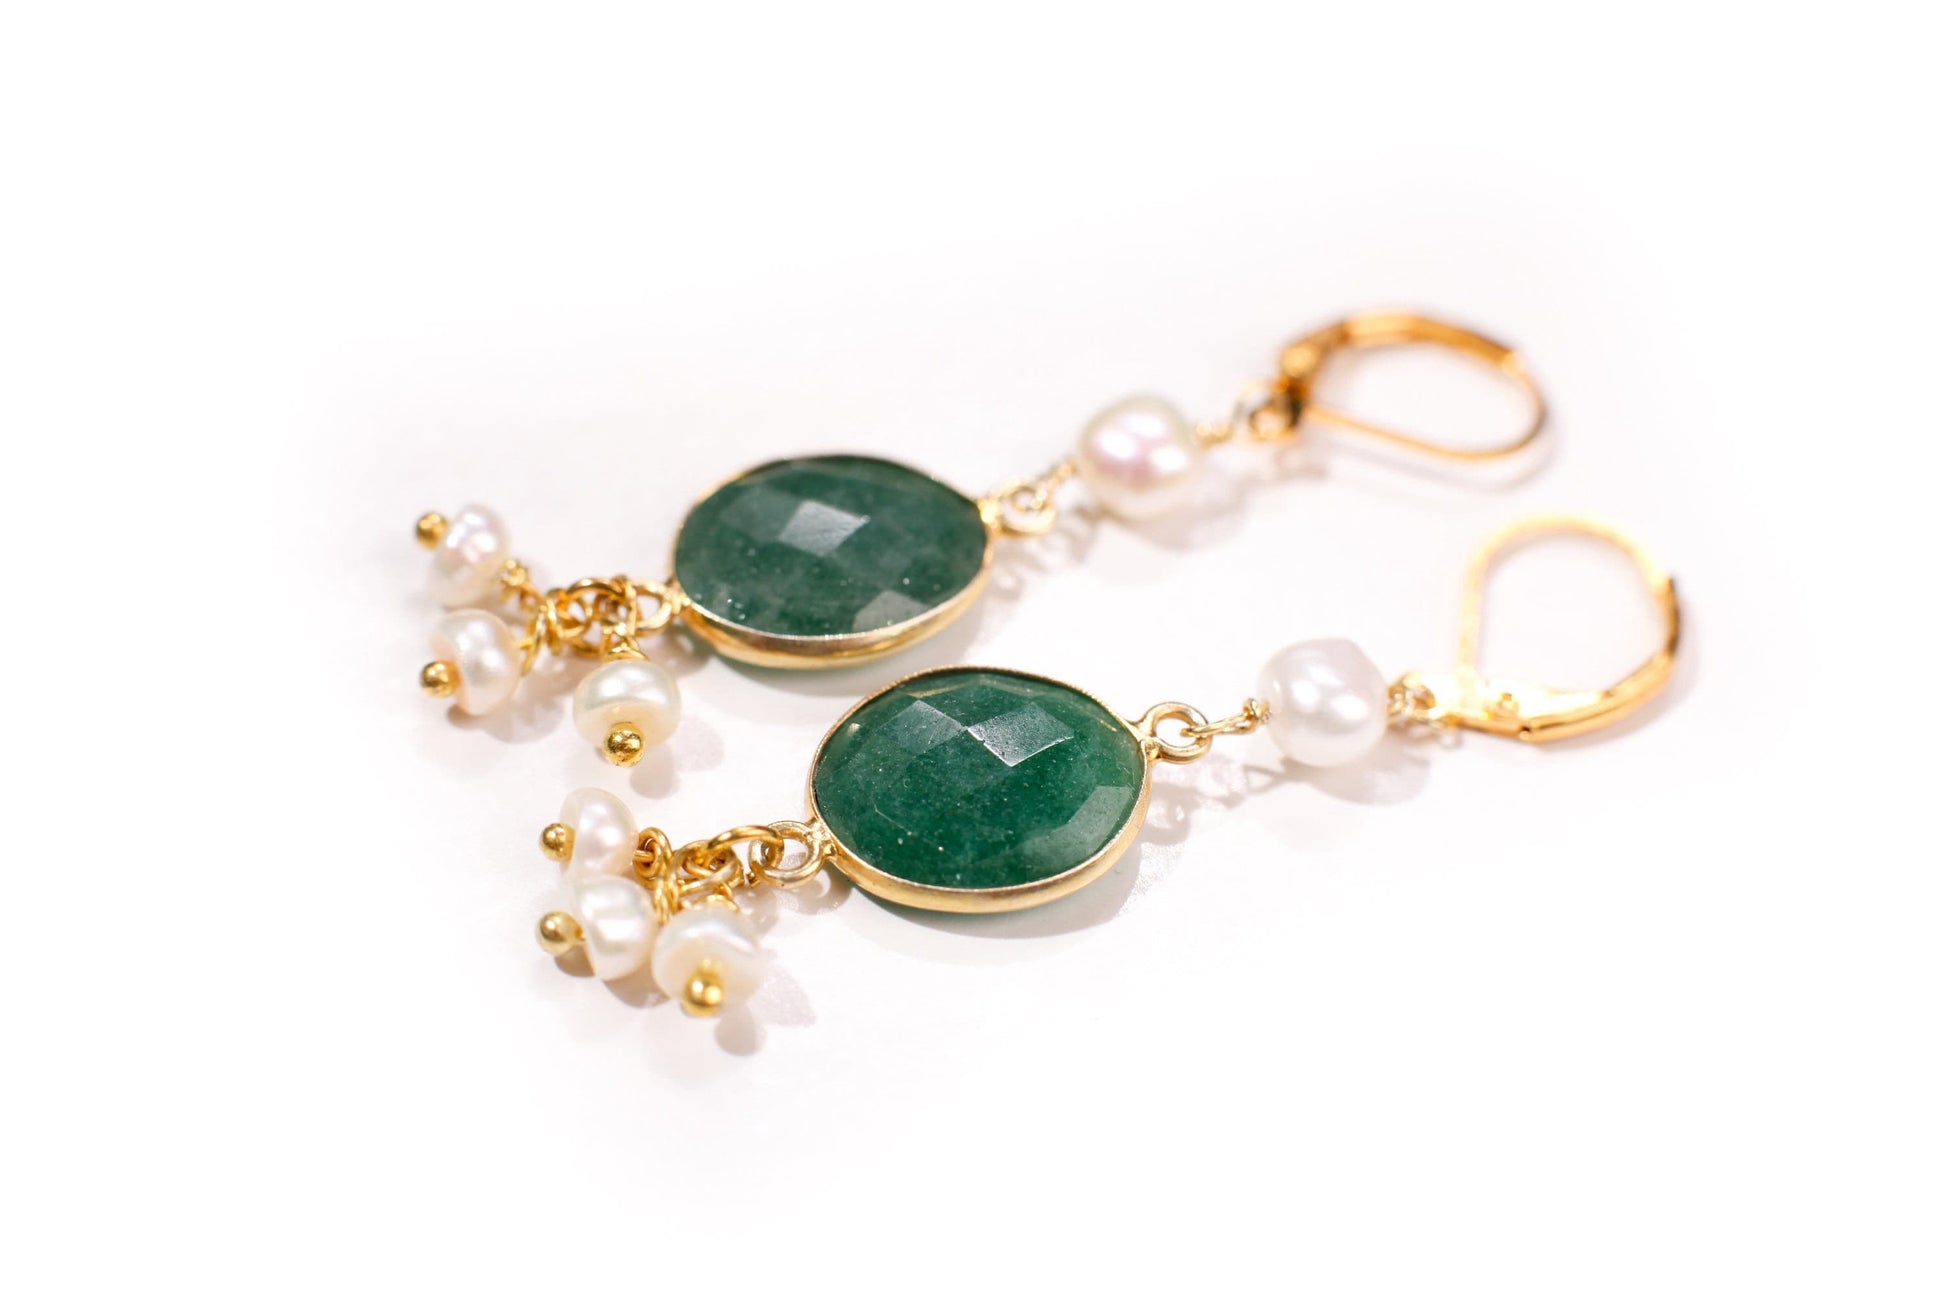 Emerald Earrings Free Form Gold Bezel with Fresh Water Pearl Clusters Earrings in Gold Ear Wire,Valentine, Bridesmaid, Handmade Gift for her